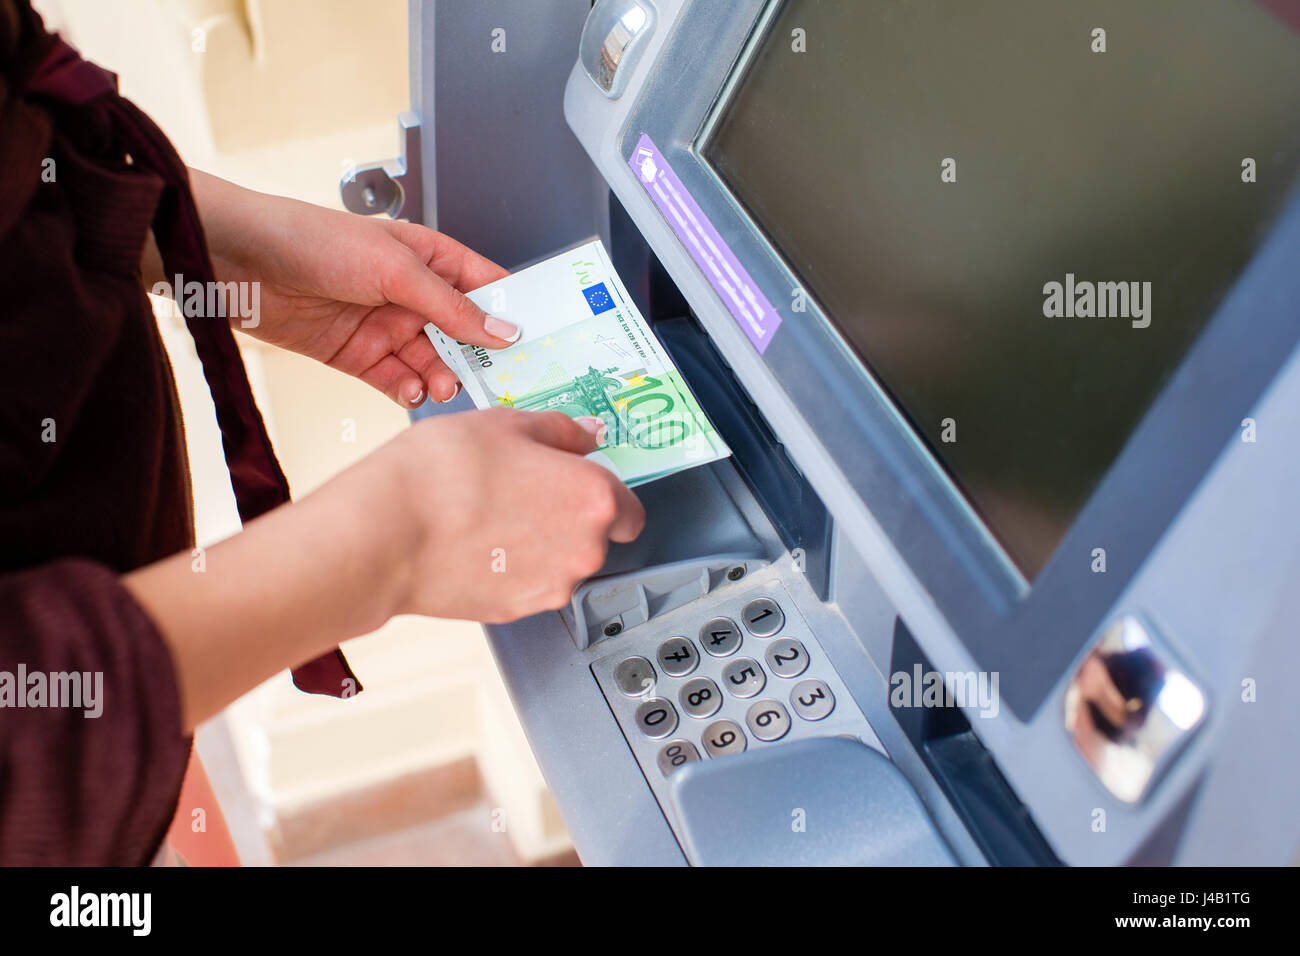 A bundle of money from one hundred euros. Women's hands hold money denominations of 100 euros. Cash out money at an ATM Stock Photo